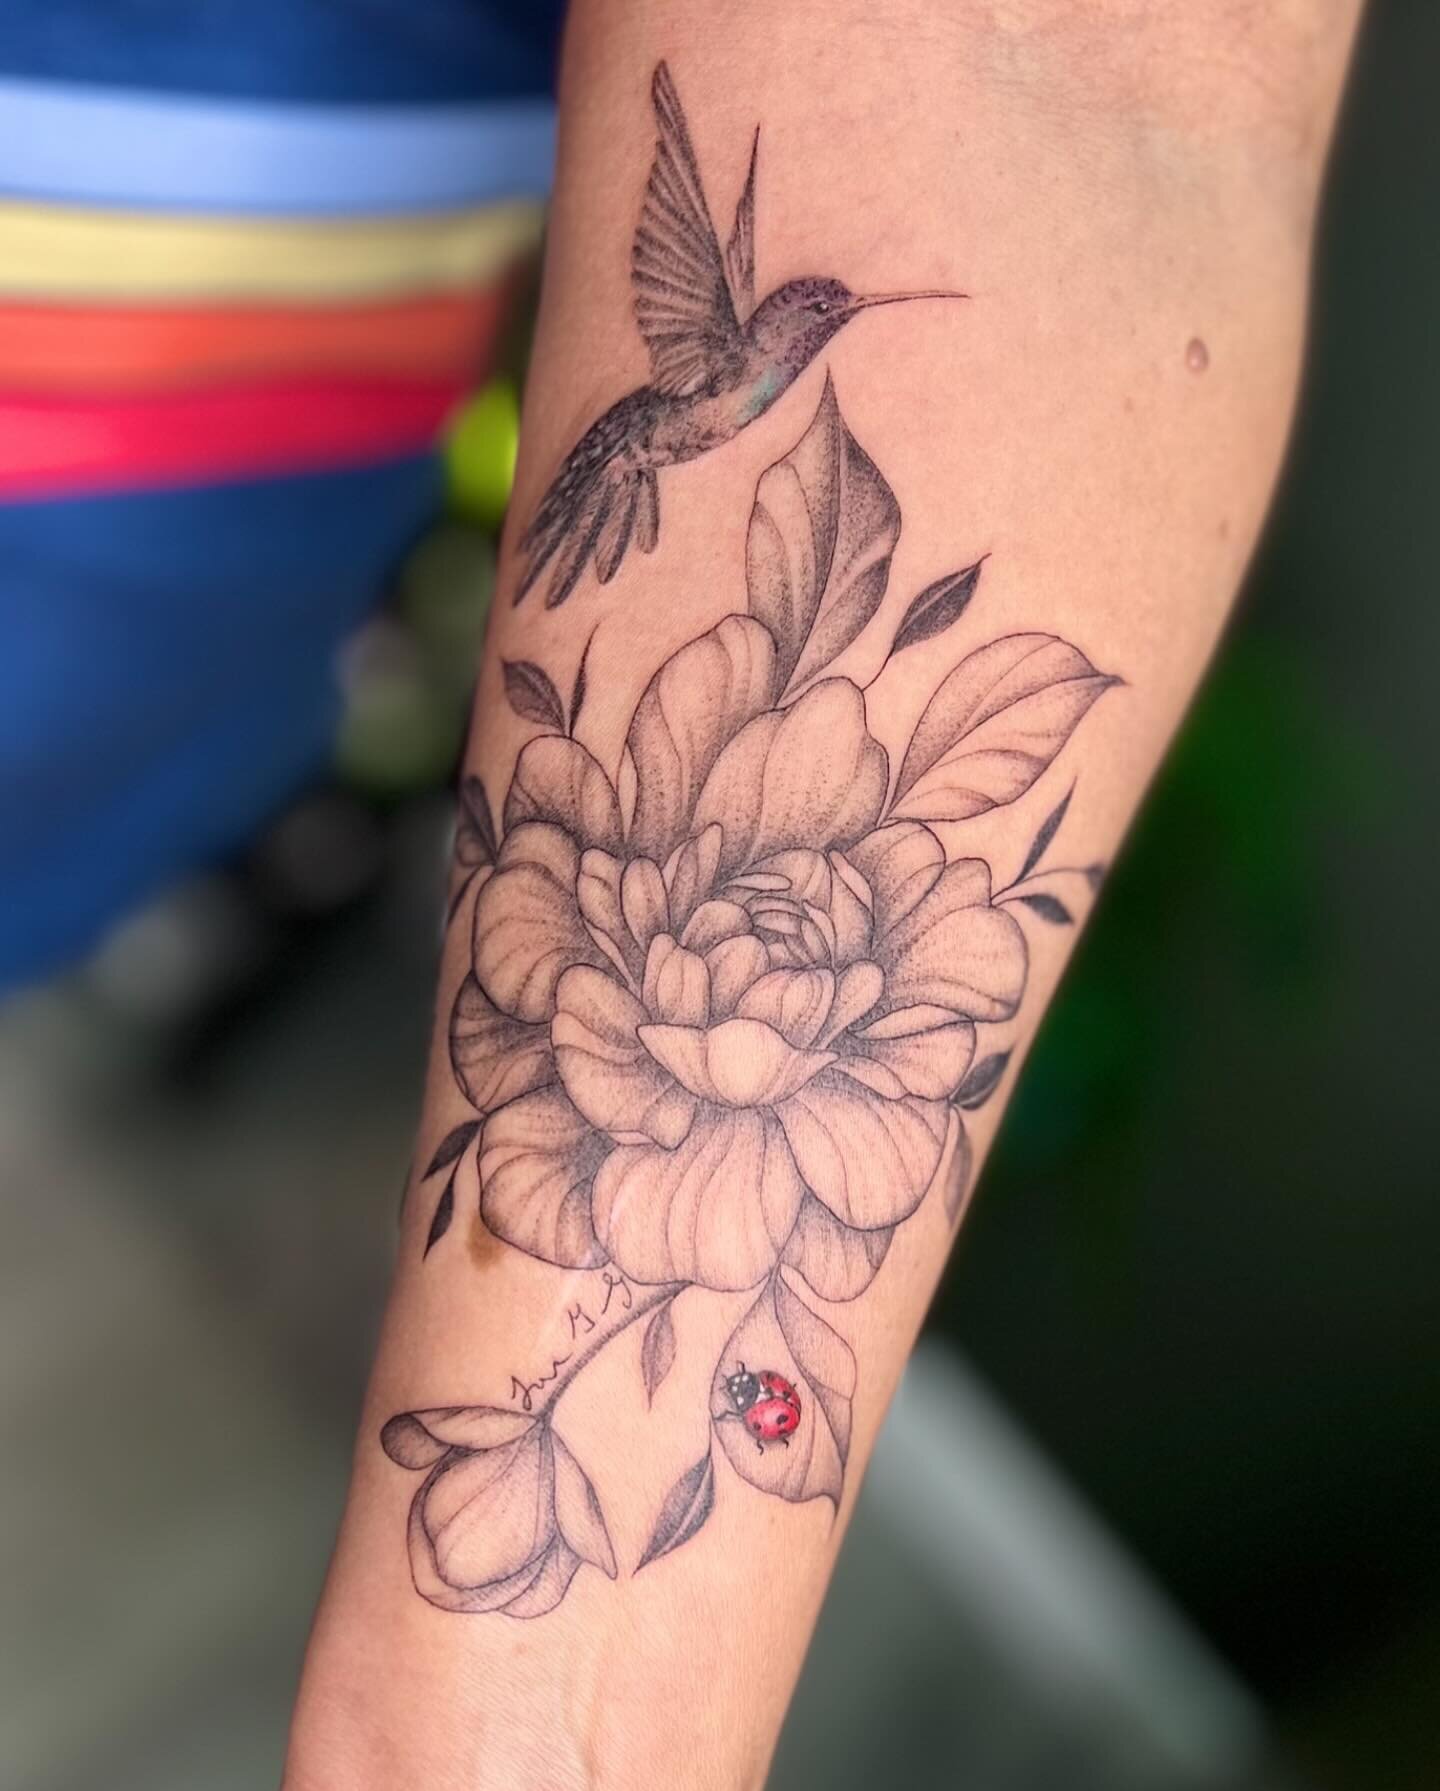 This lovely memorial piece was done for my client to remember her grandmother 💜🐞 we added pops of color in the hummingbird and ladybug so they pop

Now booking for May-June. Use the link in my bio to my website to find out how to fill out a tattoo 